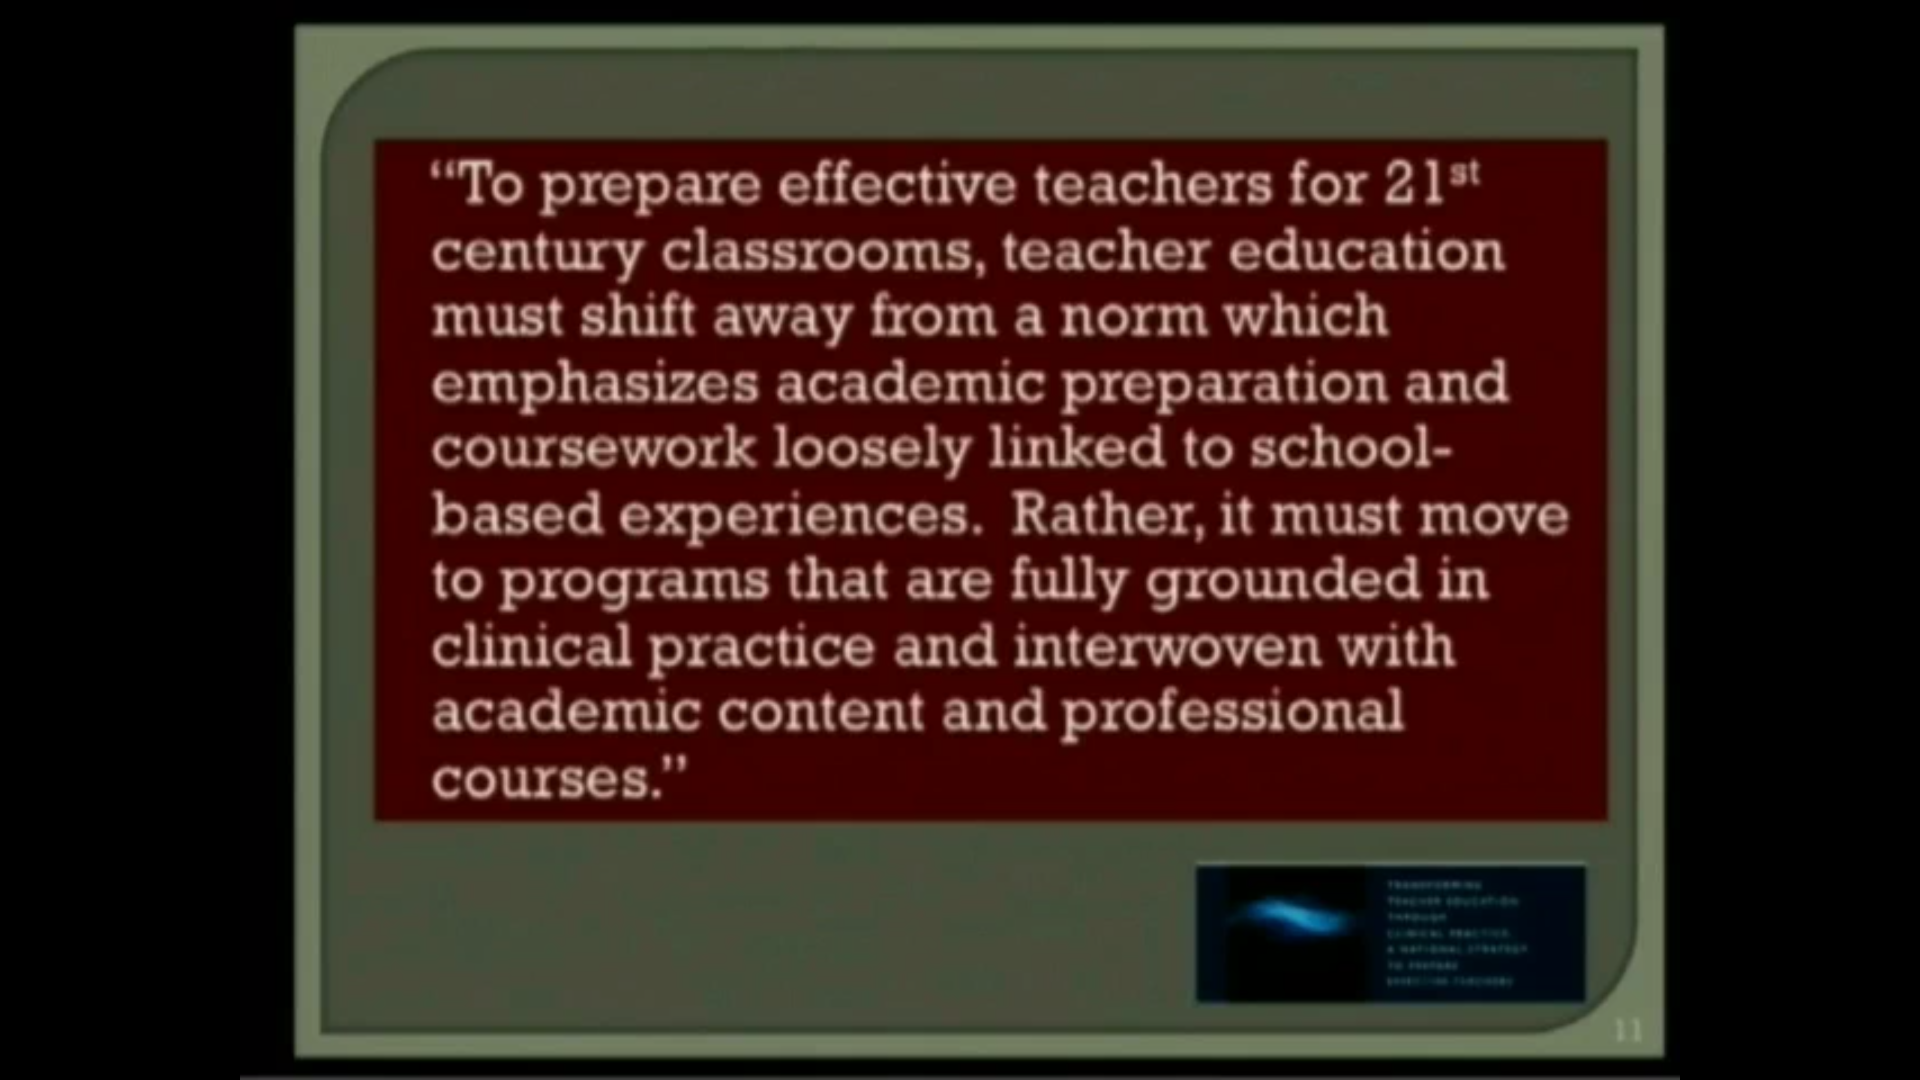 Critical Issues In Mathematics Education 2011: Mathematical Education of Teachers, lecture 9 - National Science Foundation, Common Core Implementation and the Mathematical Education of Teachers: Policy Perspectives and Support Thumbnail